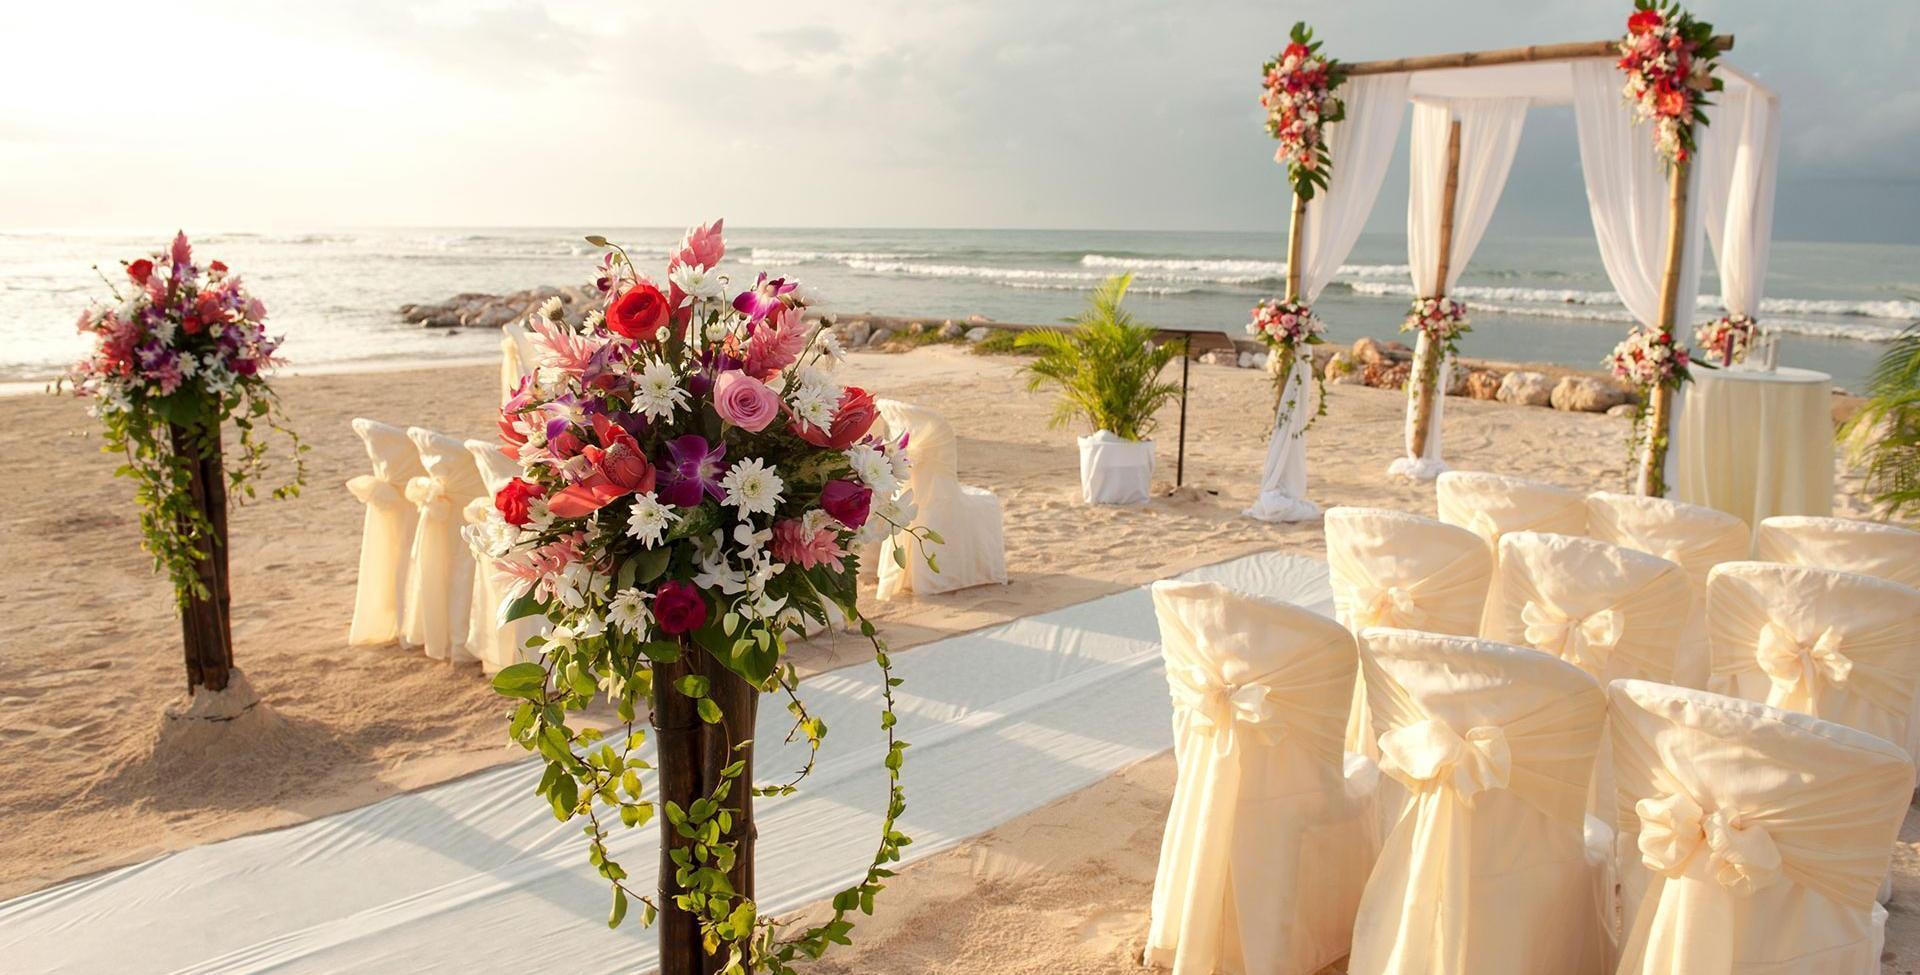 The 10 Best Wedding Venues in St. Barts - WeddingWire